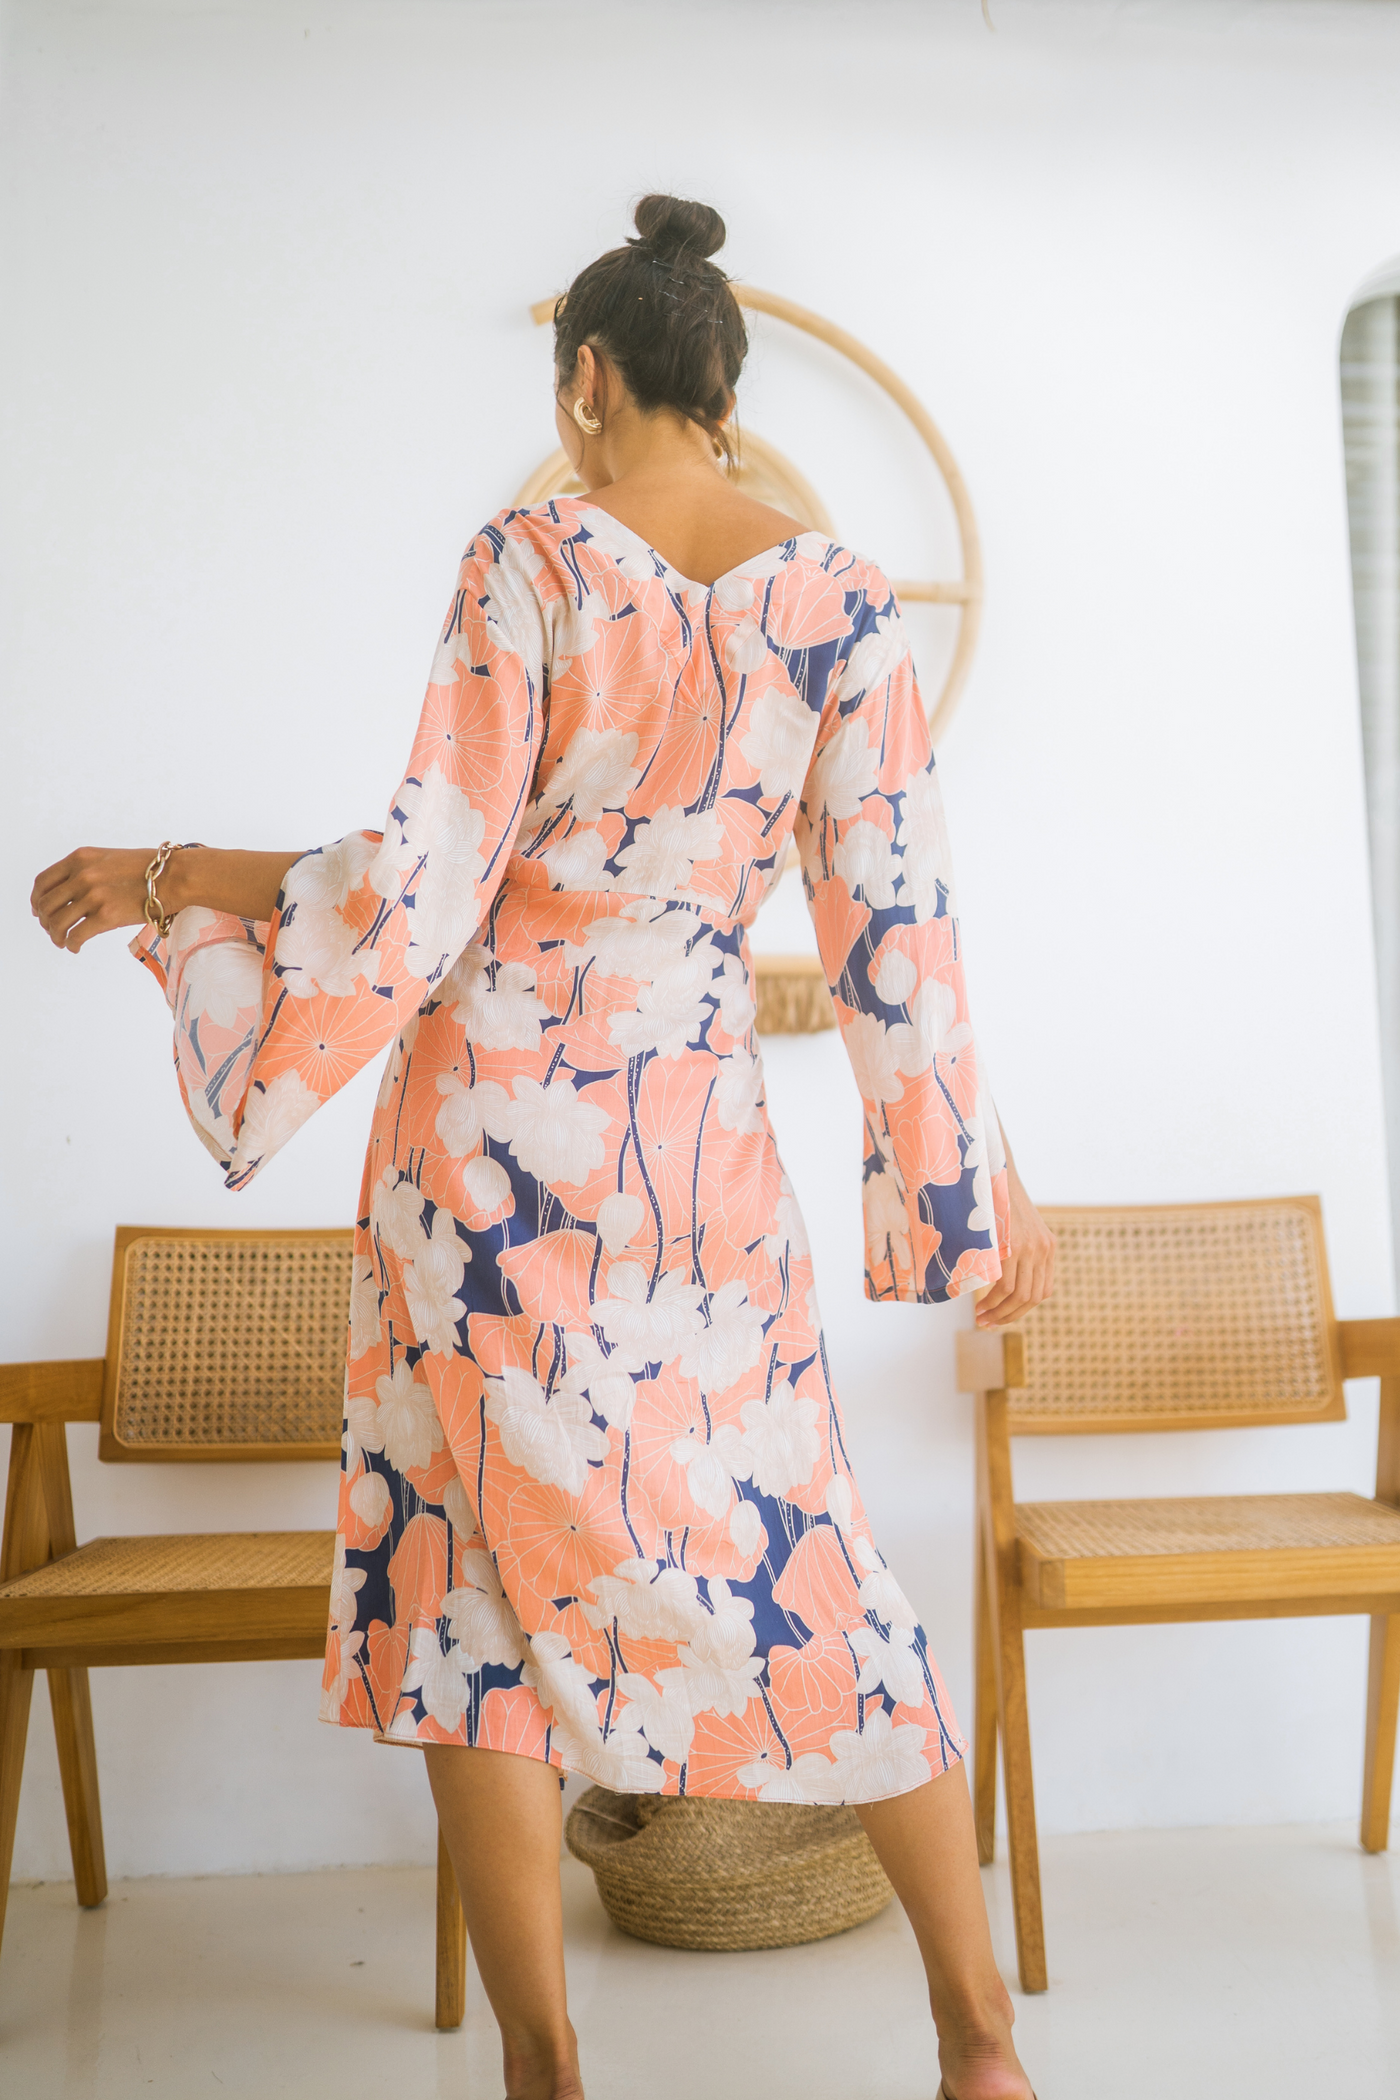 One Puram Chela Dress in Lotus Peach, available on ZERRIN with free Singapore shipping